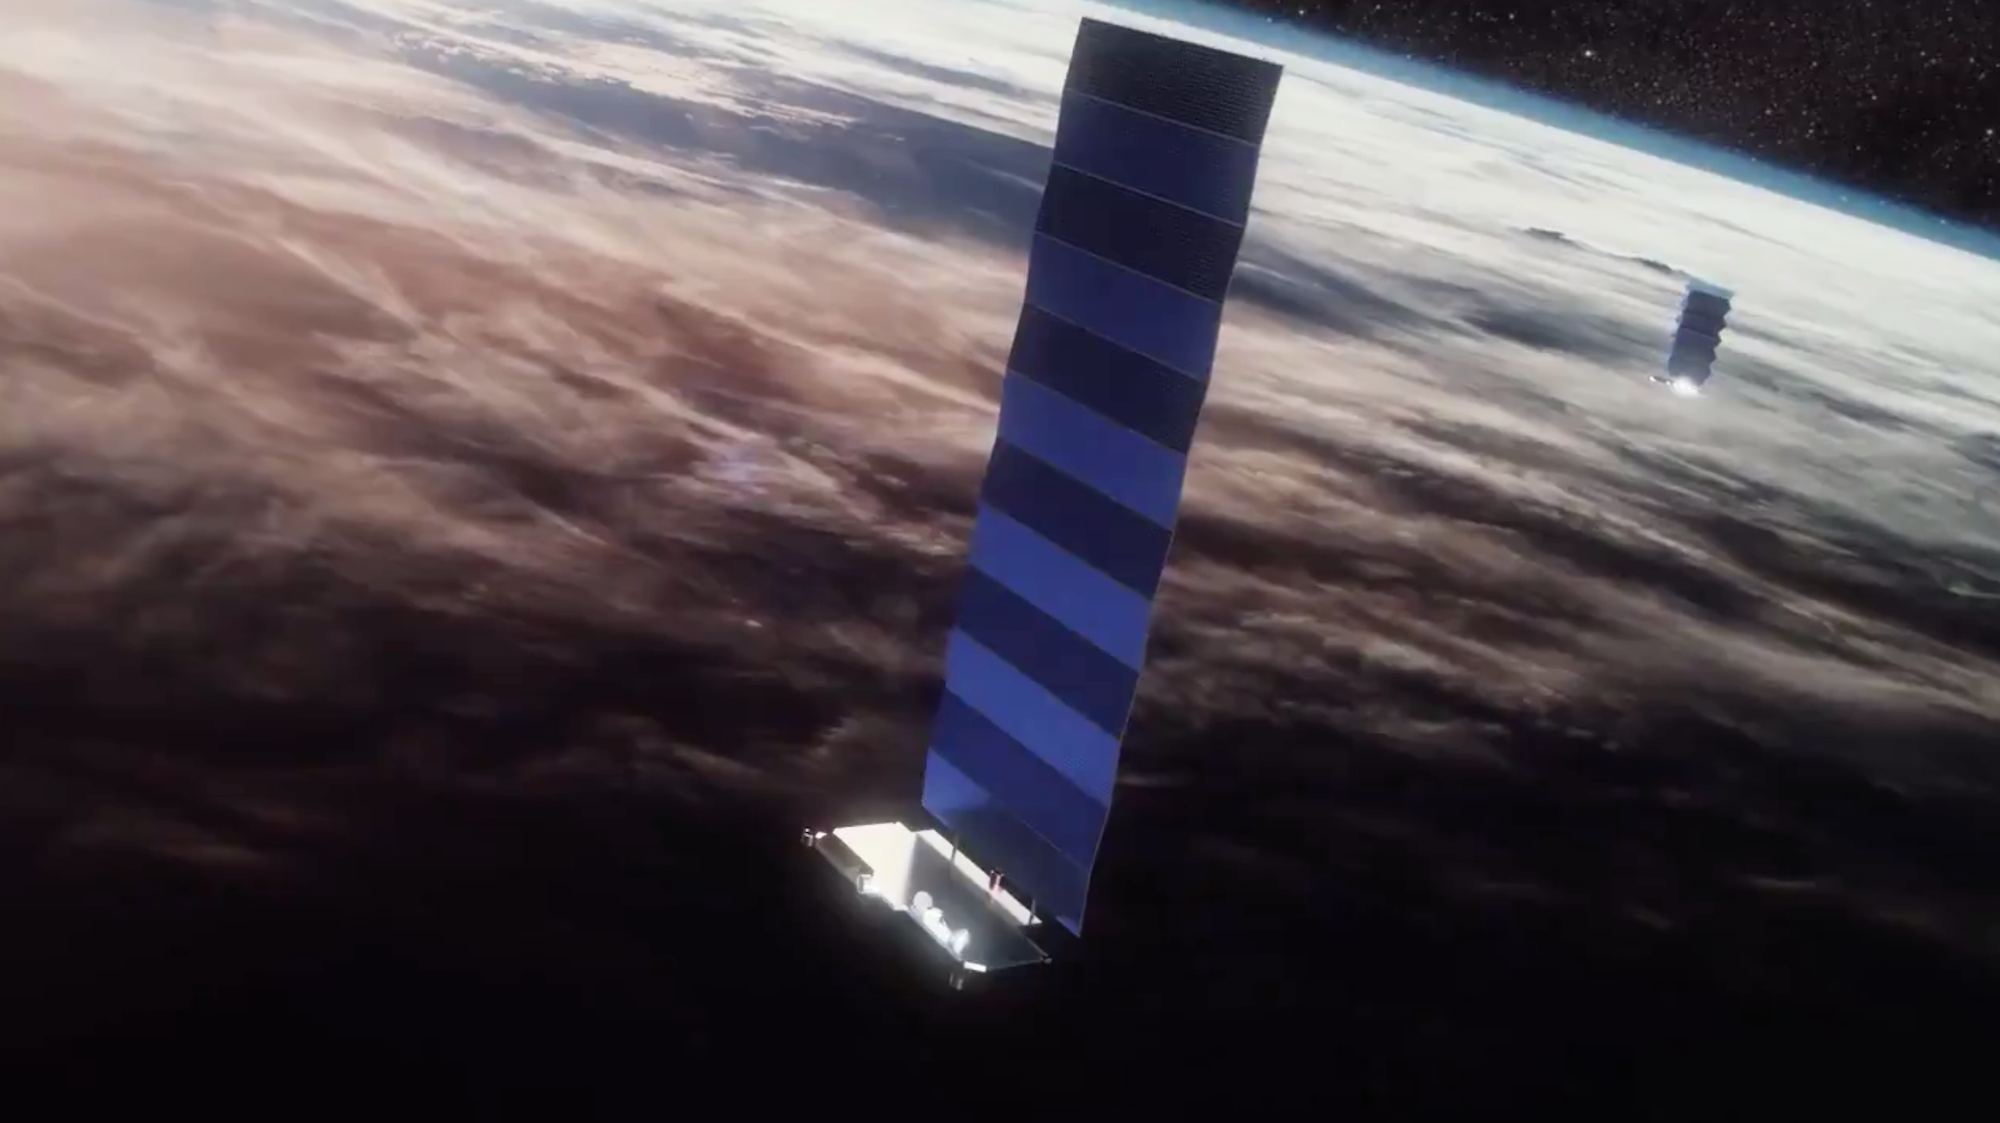 NASA has given the go-ahead for SpaceX to work out a plan to adapt its Starlink broadband internet satellites for use in a Martian communication netwo